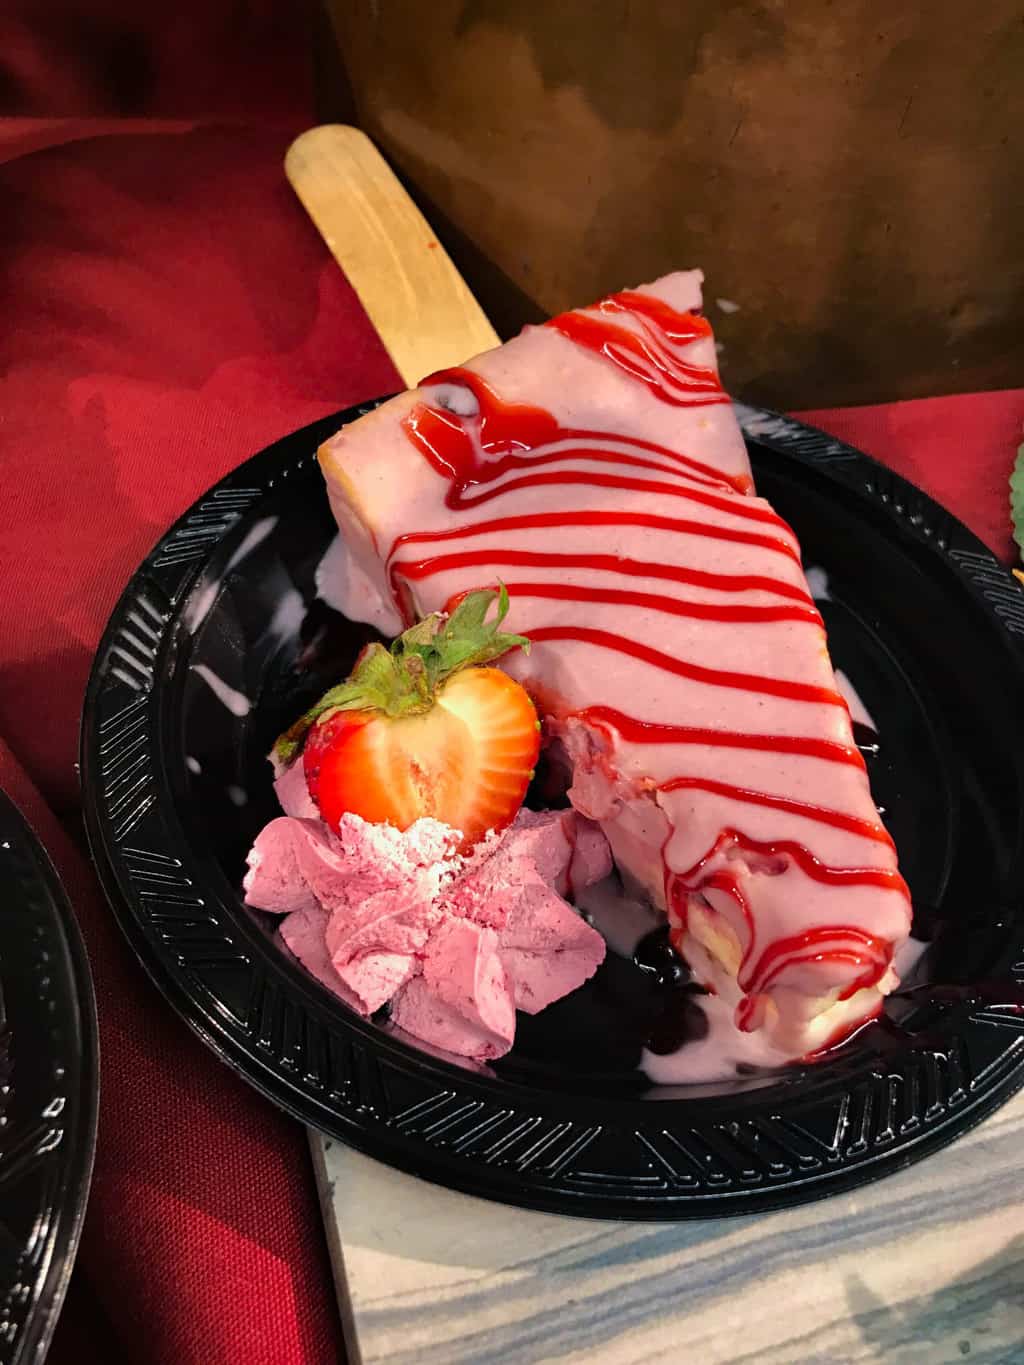 Chocolate Covered Boysenberry Cheesecake on a stick at Knott's Boysenberry Festival